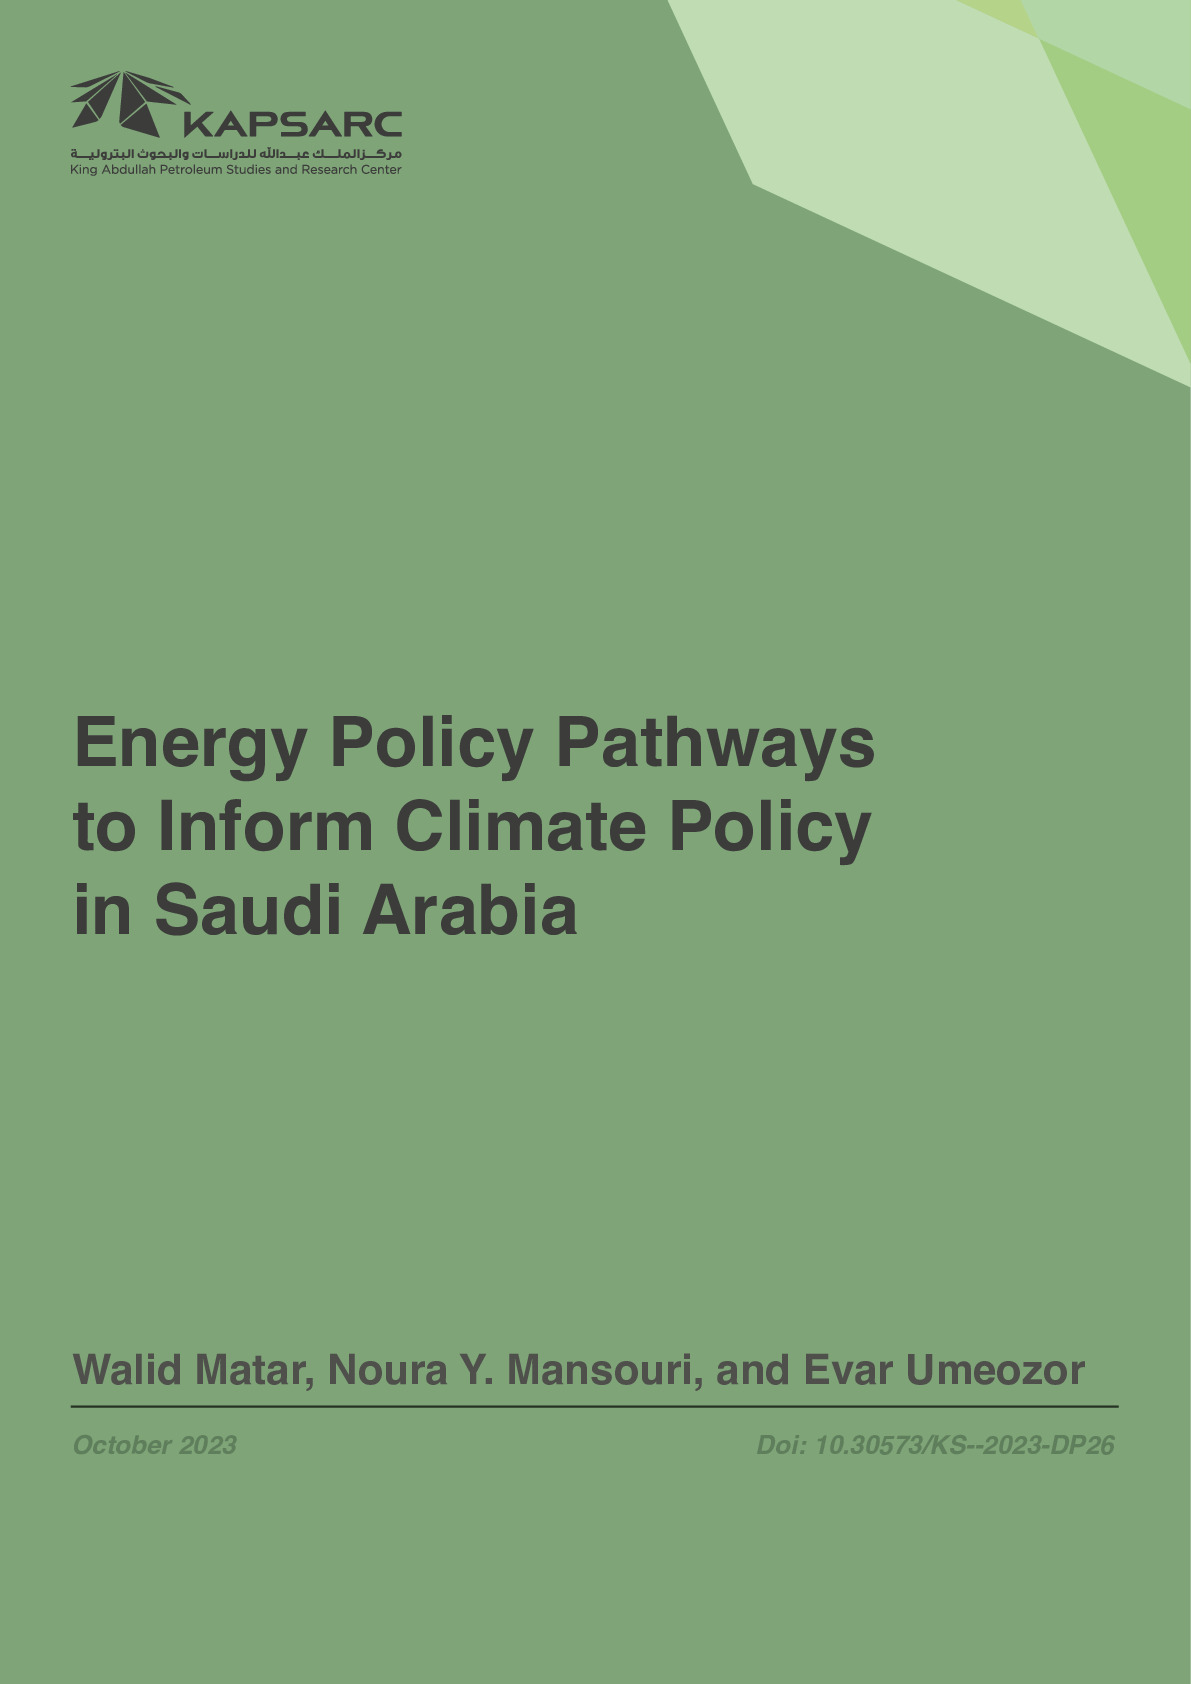 Energy Policy Pathways to Inform Climate Policy in Saudi Arabia